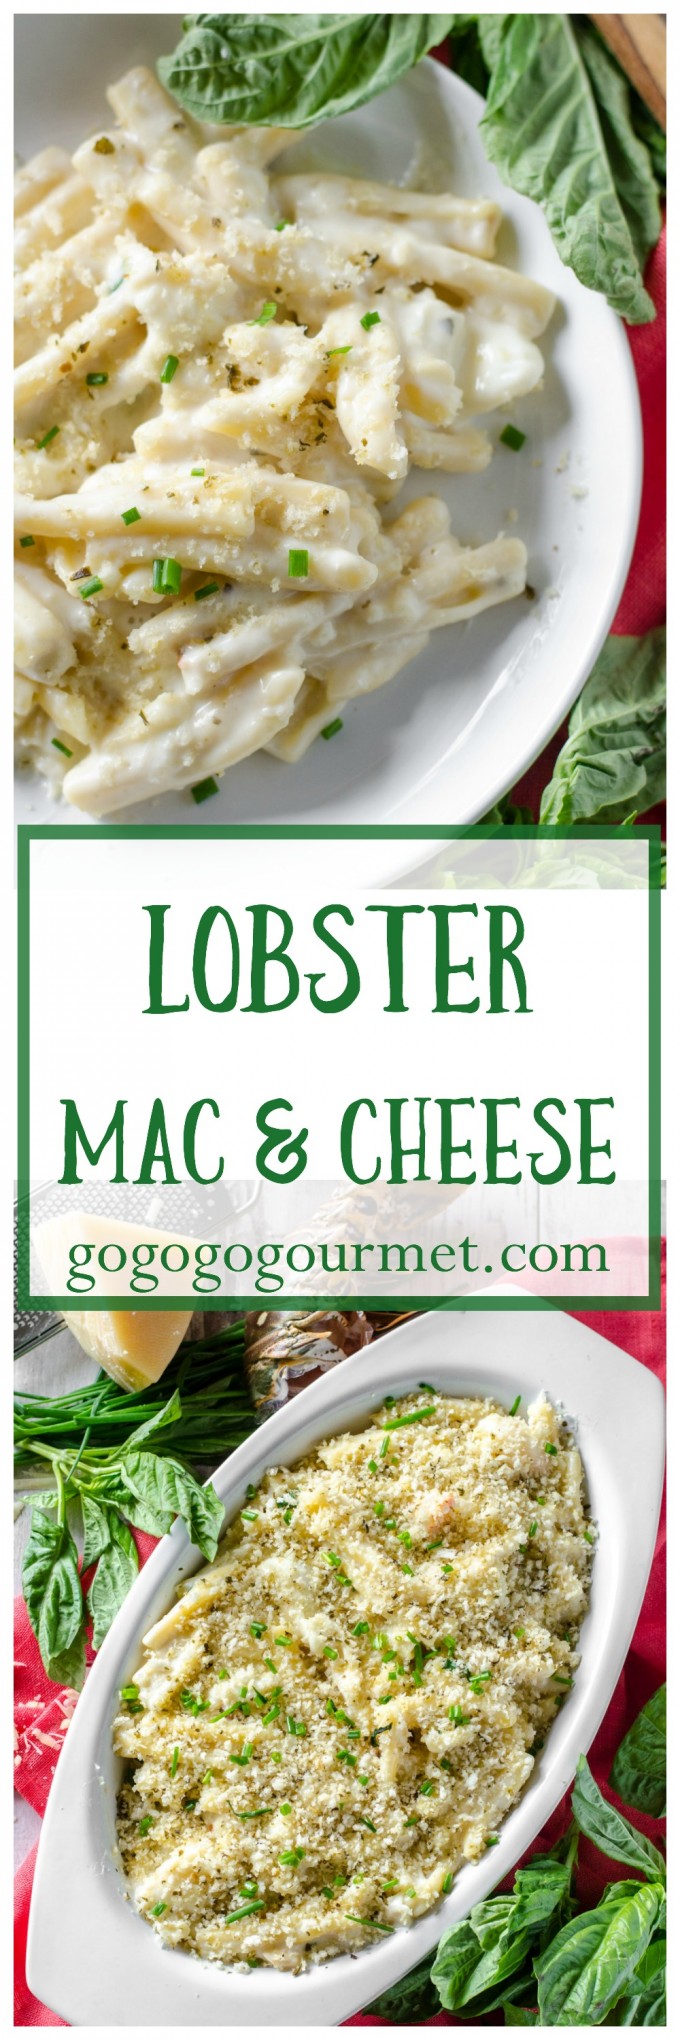 Creamy and cheesy and packed with succulent lobster, this pasta dish is sure to be a favorite main dish OR side dish! | Lobster Mac and Cheese | Go Go Go Gourmet @Go Go Go Gourmet via @gogogogourmet